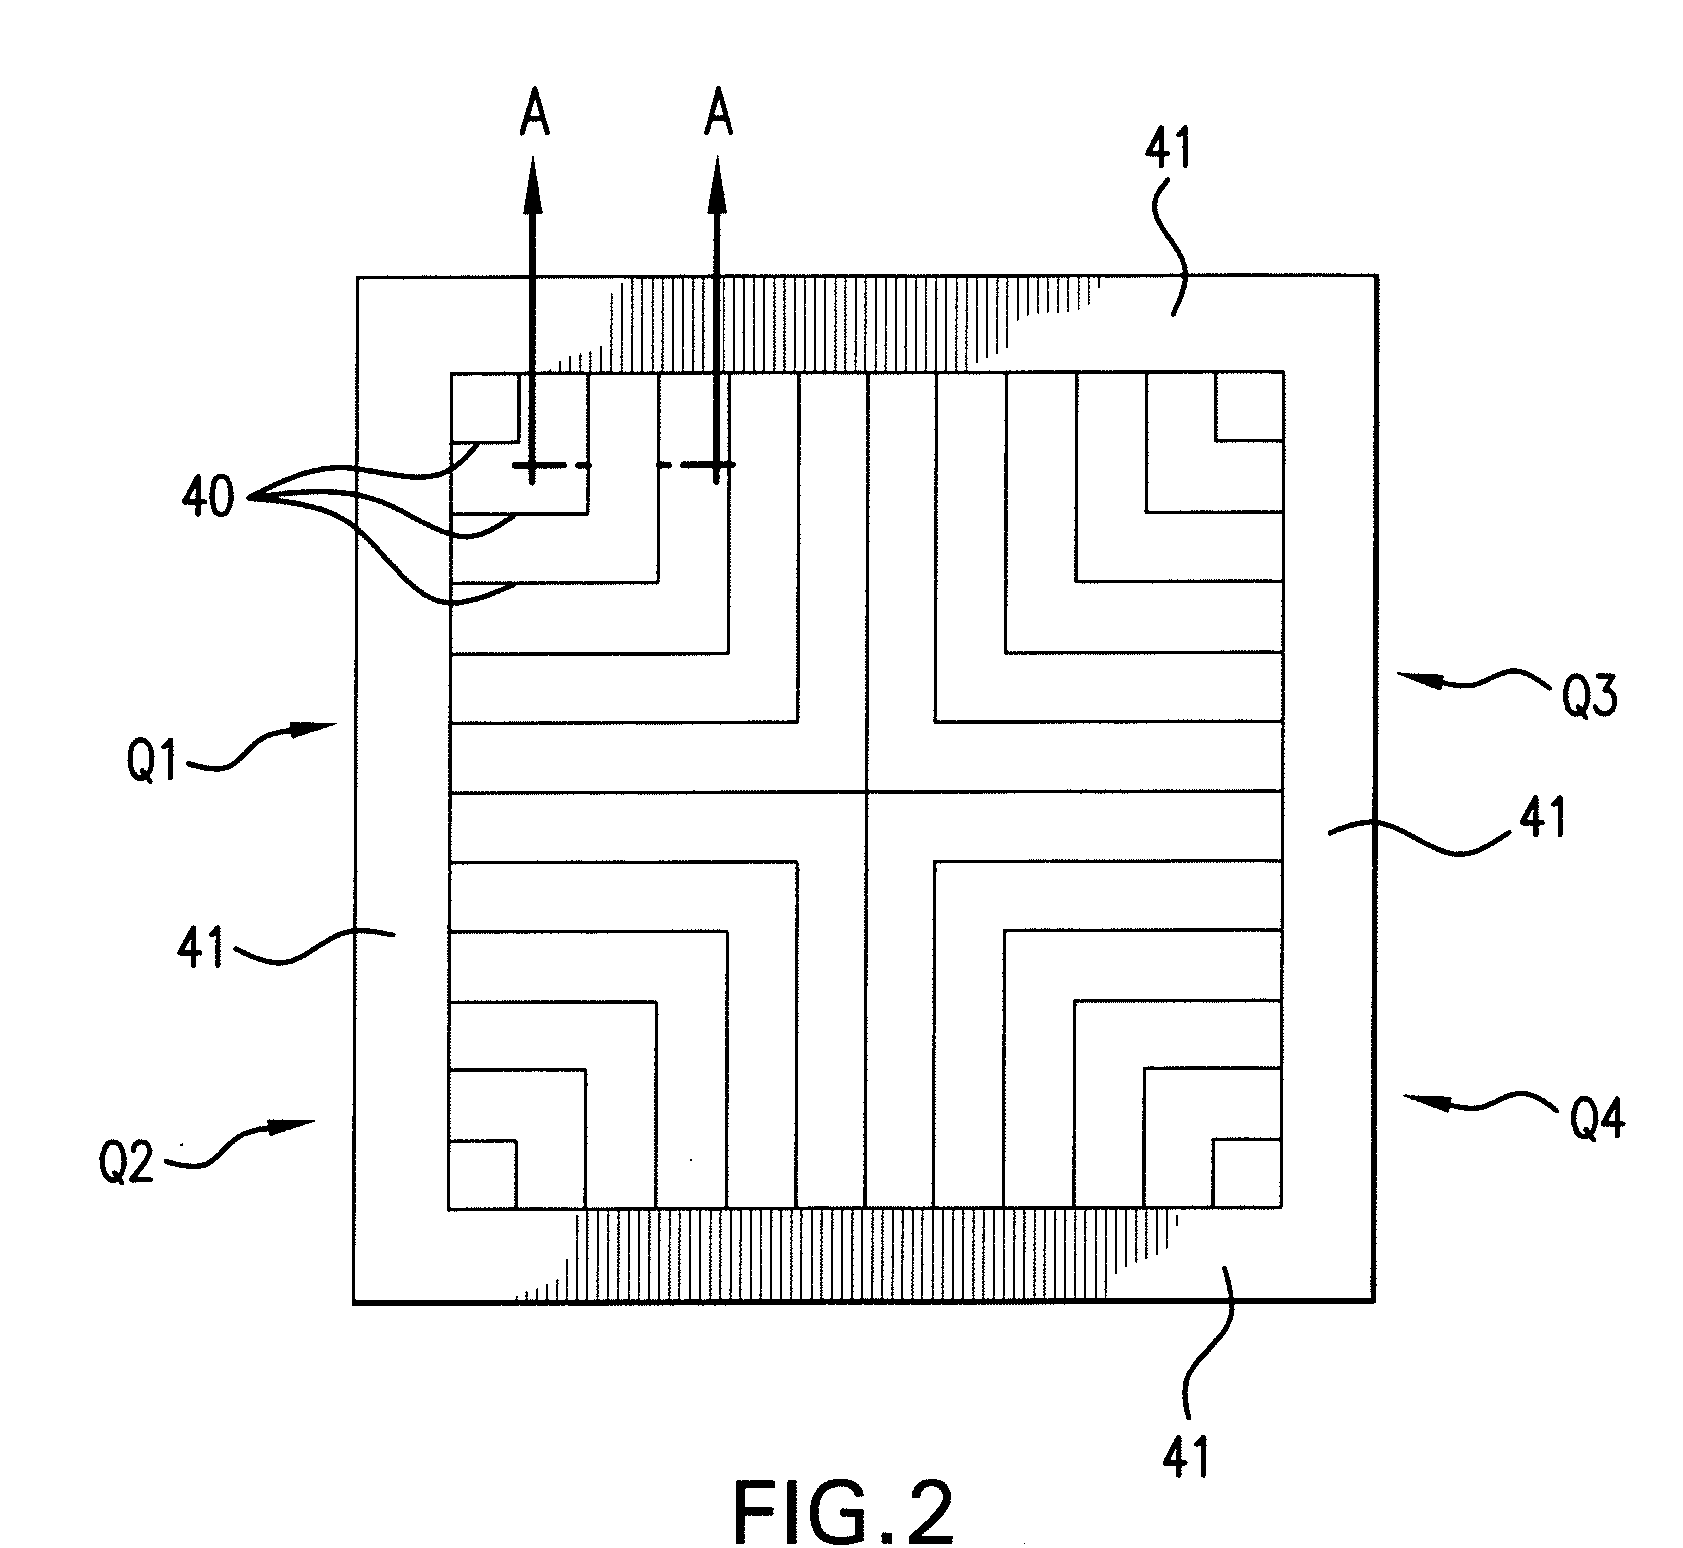 III-V Compound Semiconductor Solar Cell for Terrestrial Solar Array